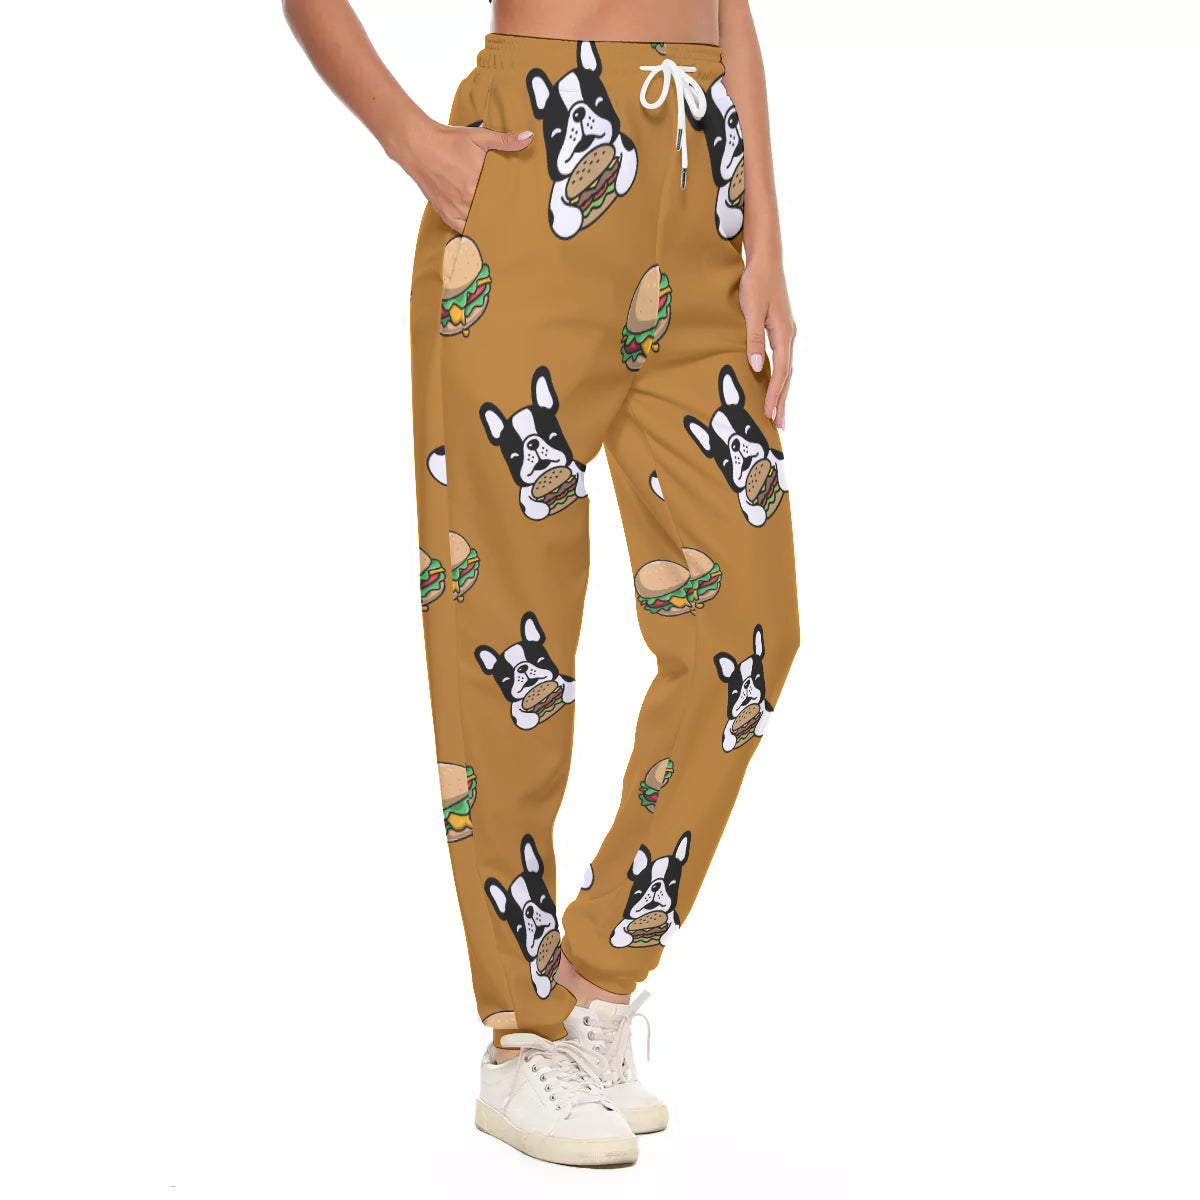 TILLY - Women's Casual Pants - Frenchie Bulldog Shop